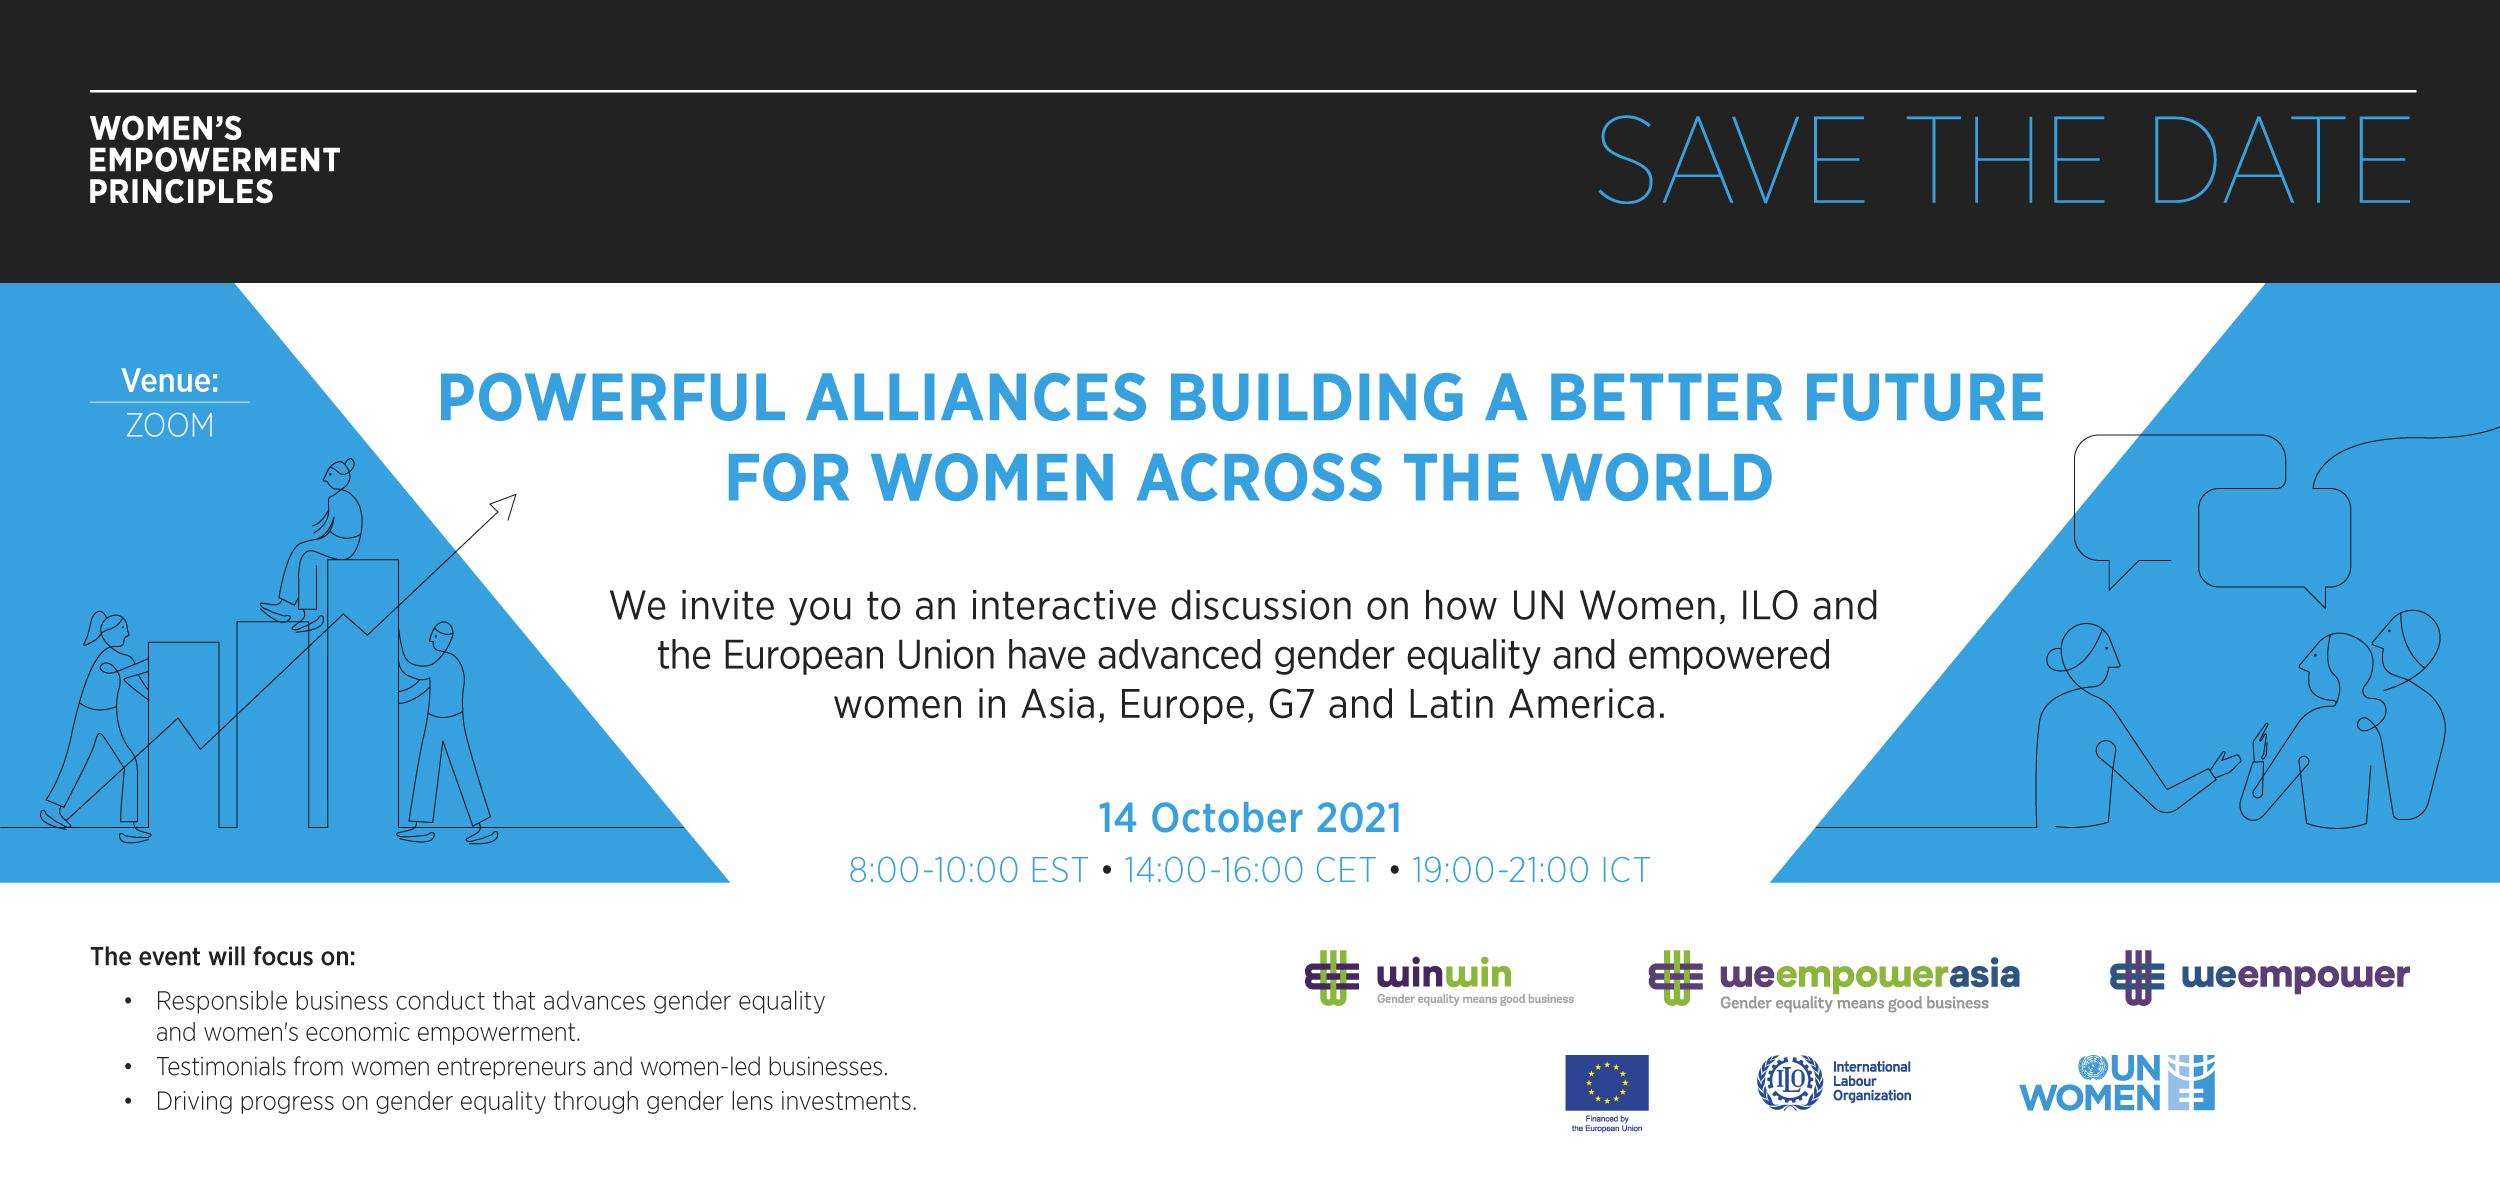 Powerful alliances building a better future for women across the world